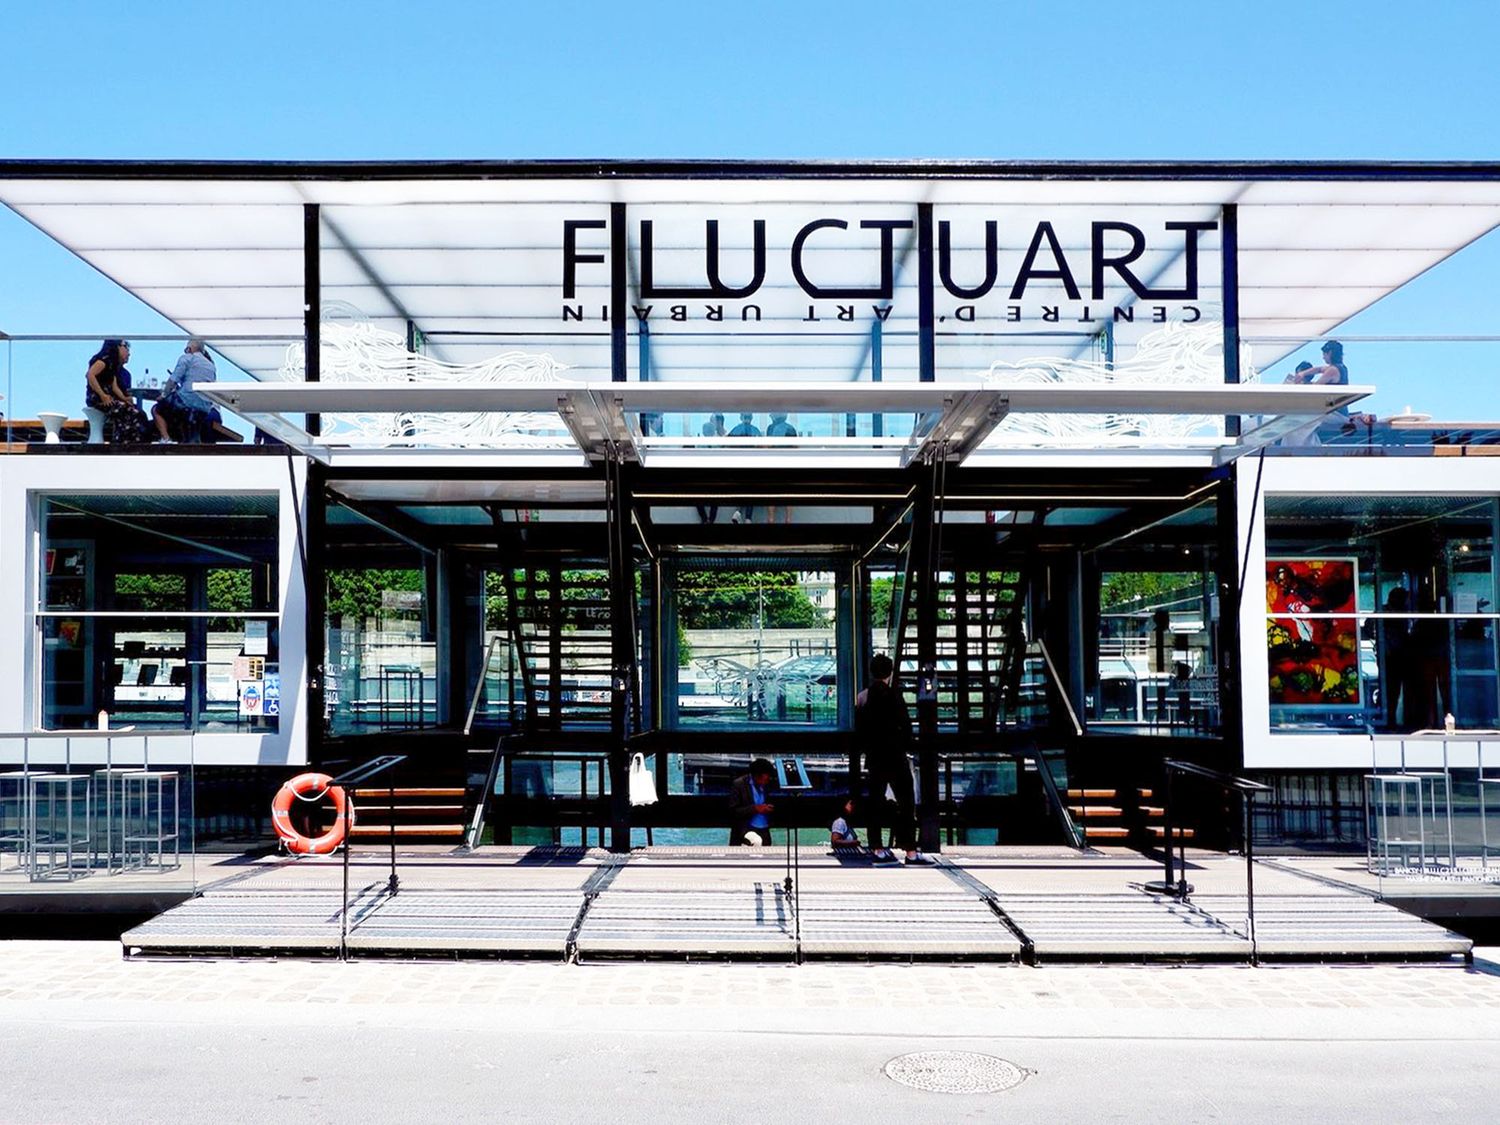 Described as an Urban Art center, Fluctuart showcases artworks from established to emerging artists within a design setting that provides a place for art, life and celebration (@Ali Postma).